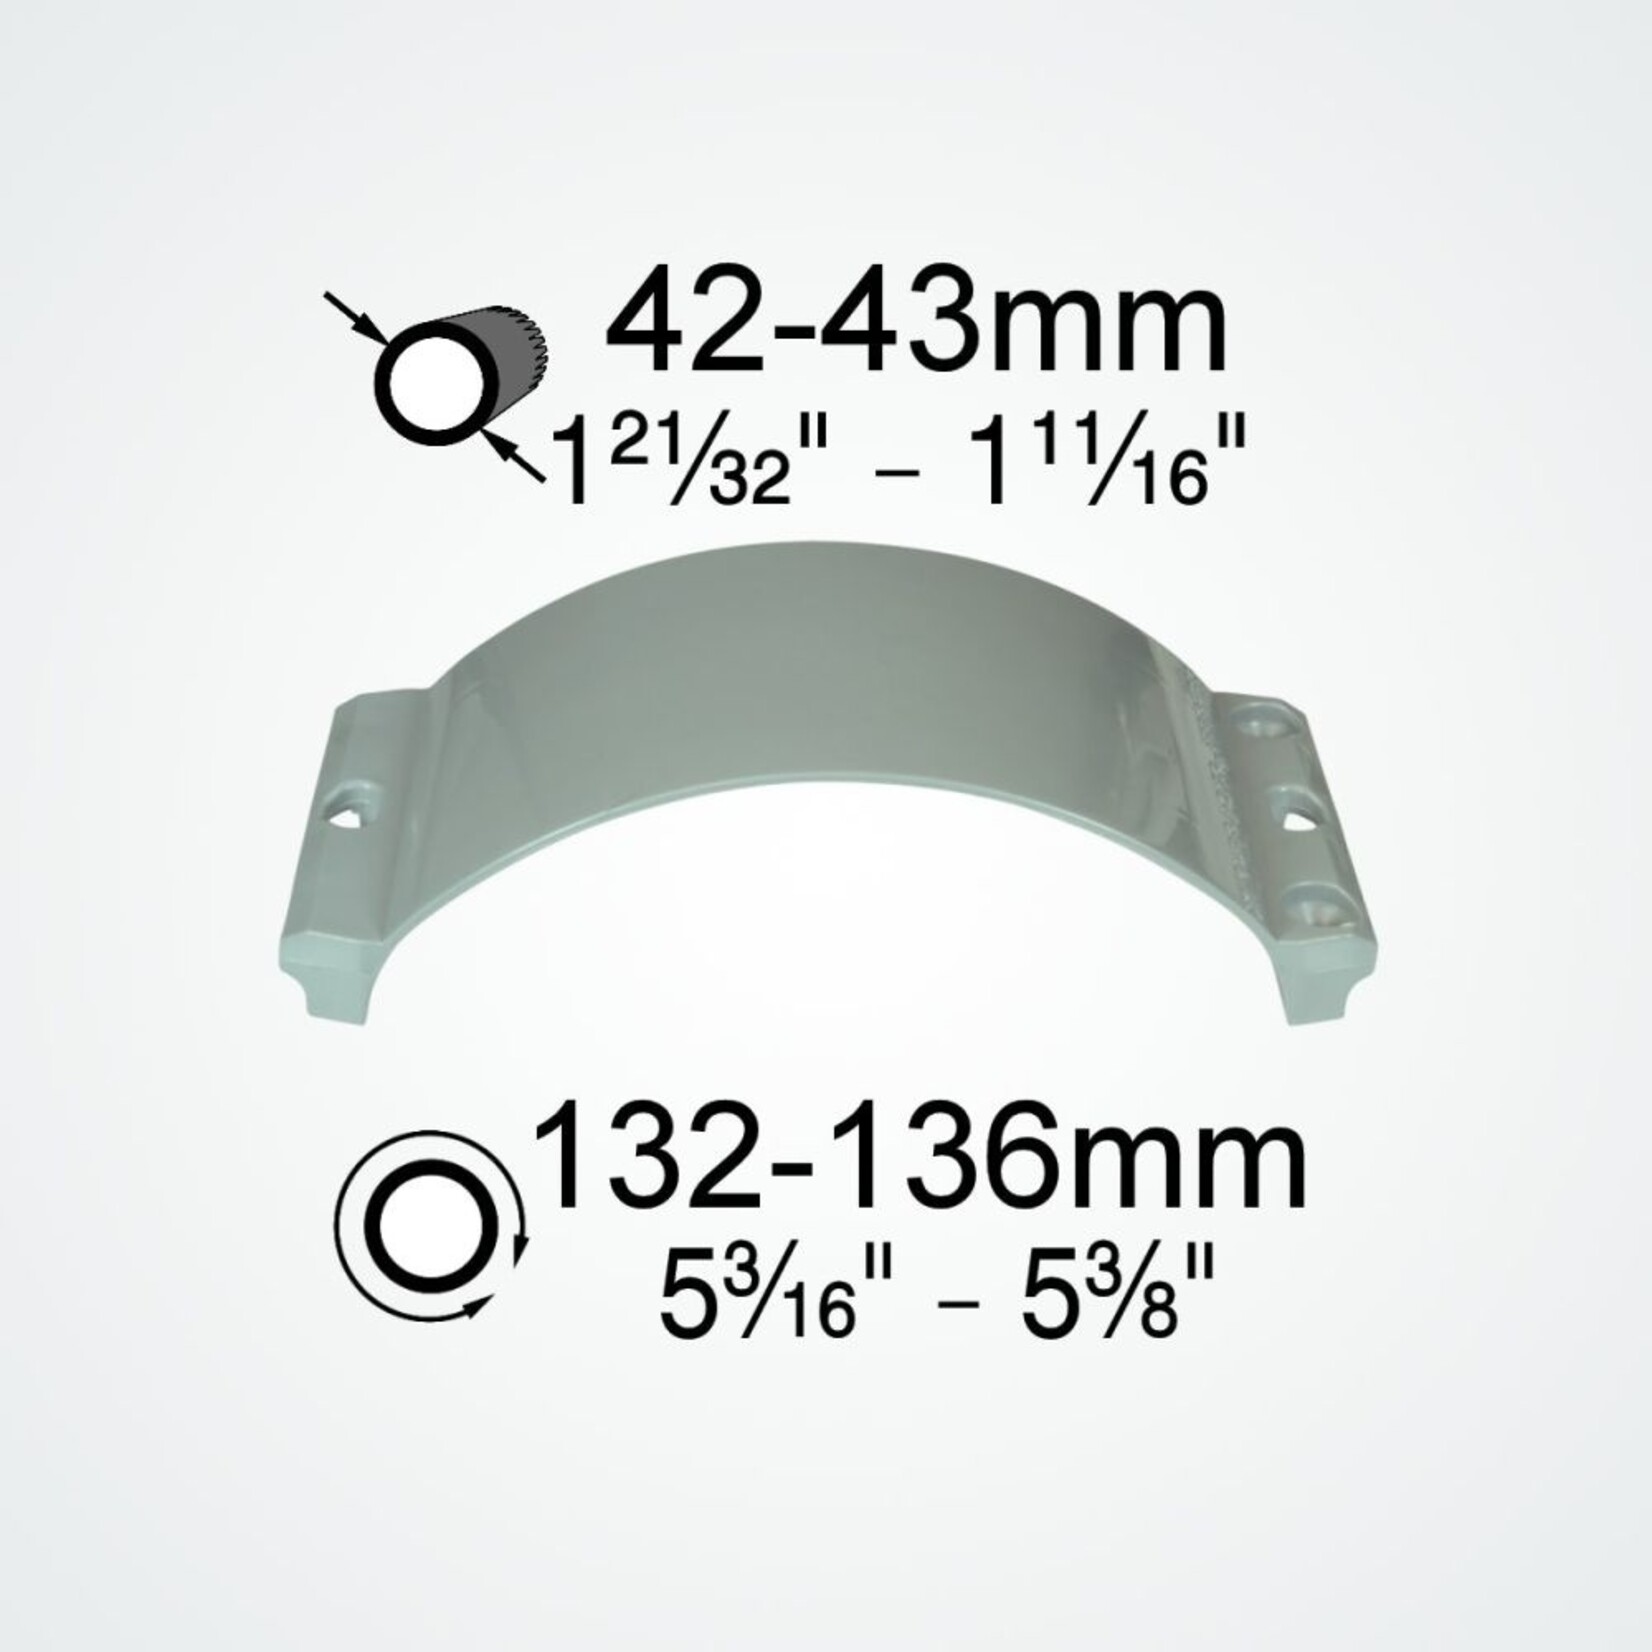 Clamcleat Aluminium Boom Cleat Retail Pack with CL244. CL134. 2 Screws & 1  Rubber.